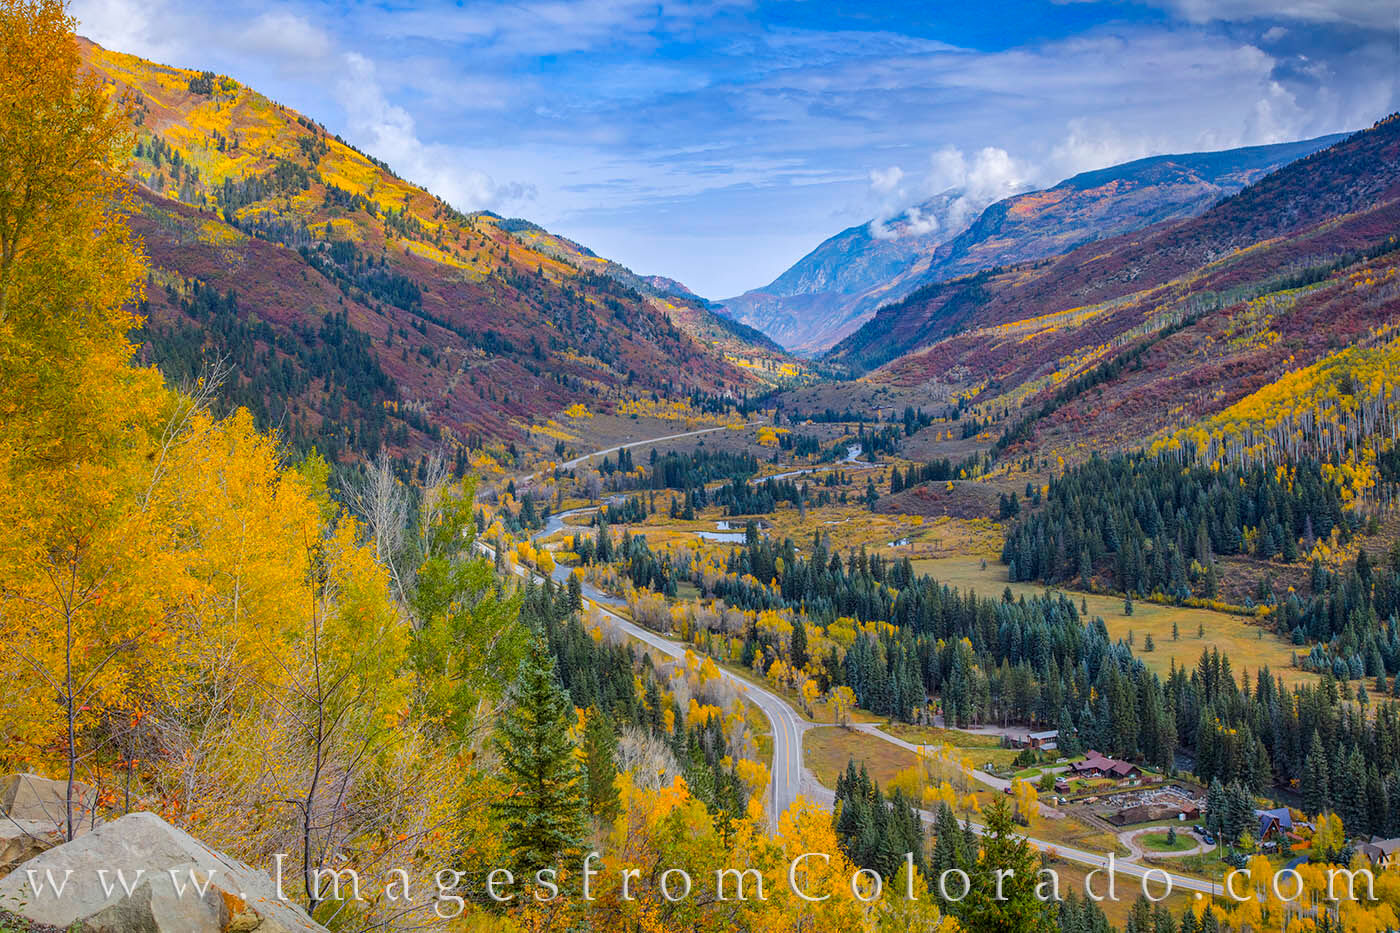 Highway 133 runs up and over McClure Pass, In October, the aspen’s leaves turn gold and the landscape is stunning, as seen...